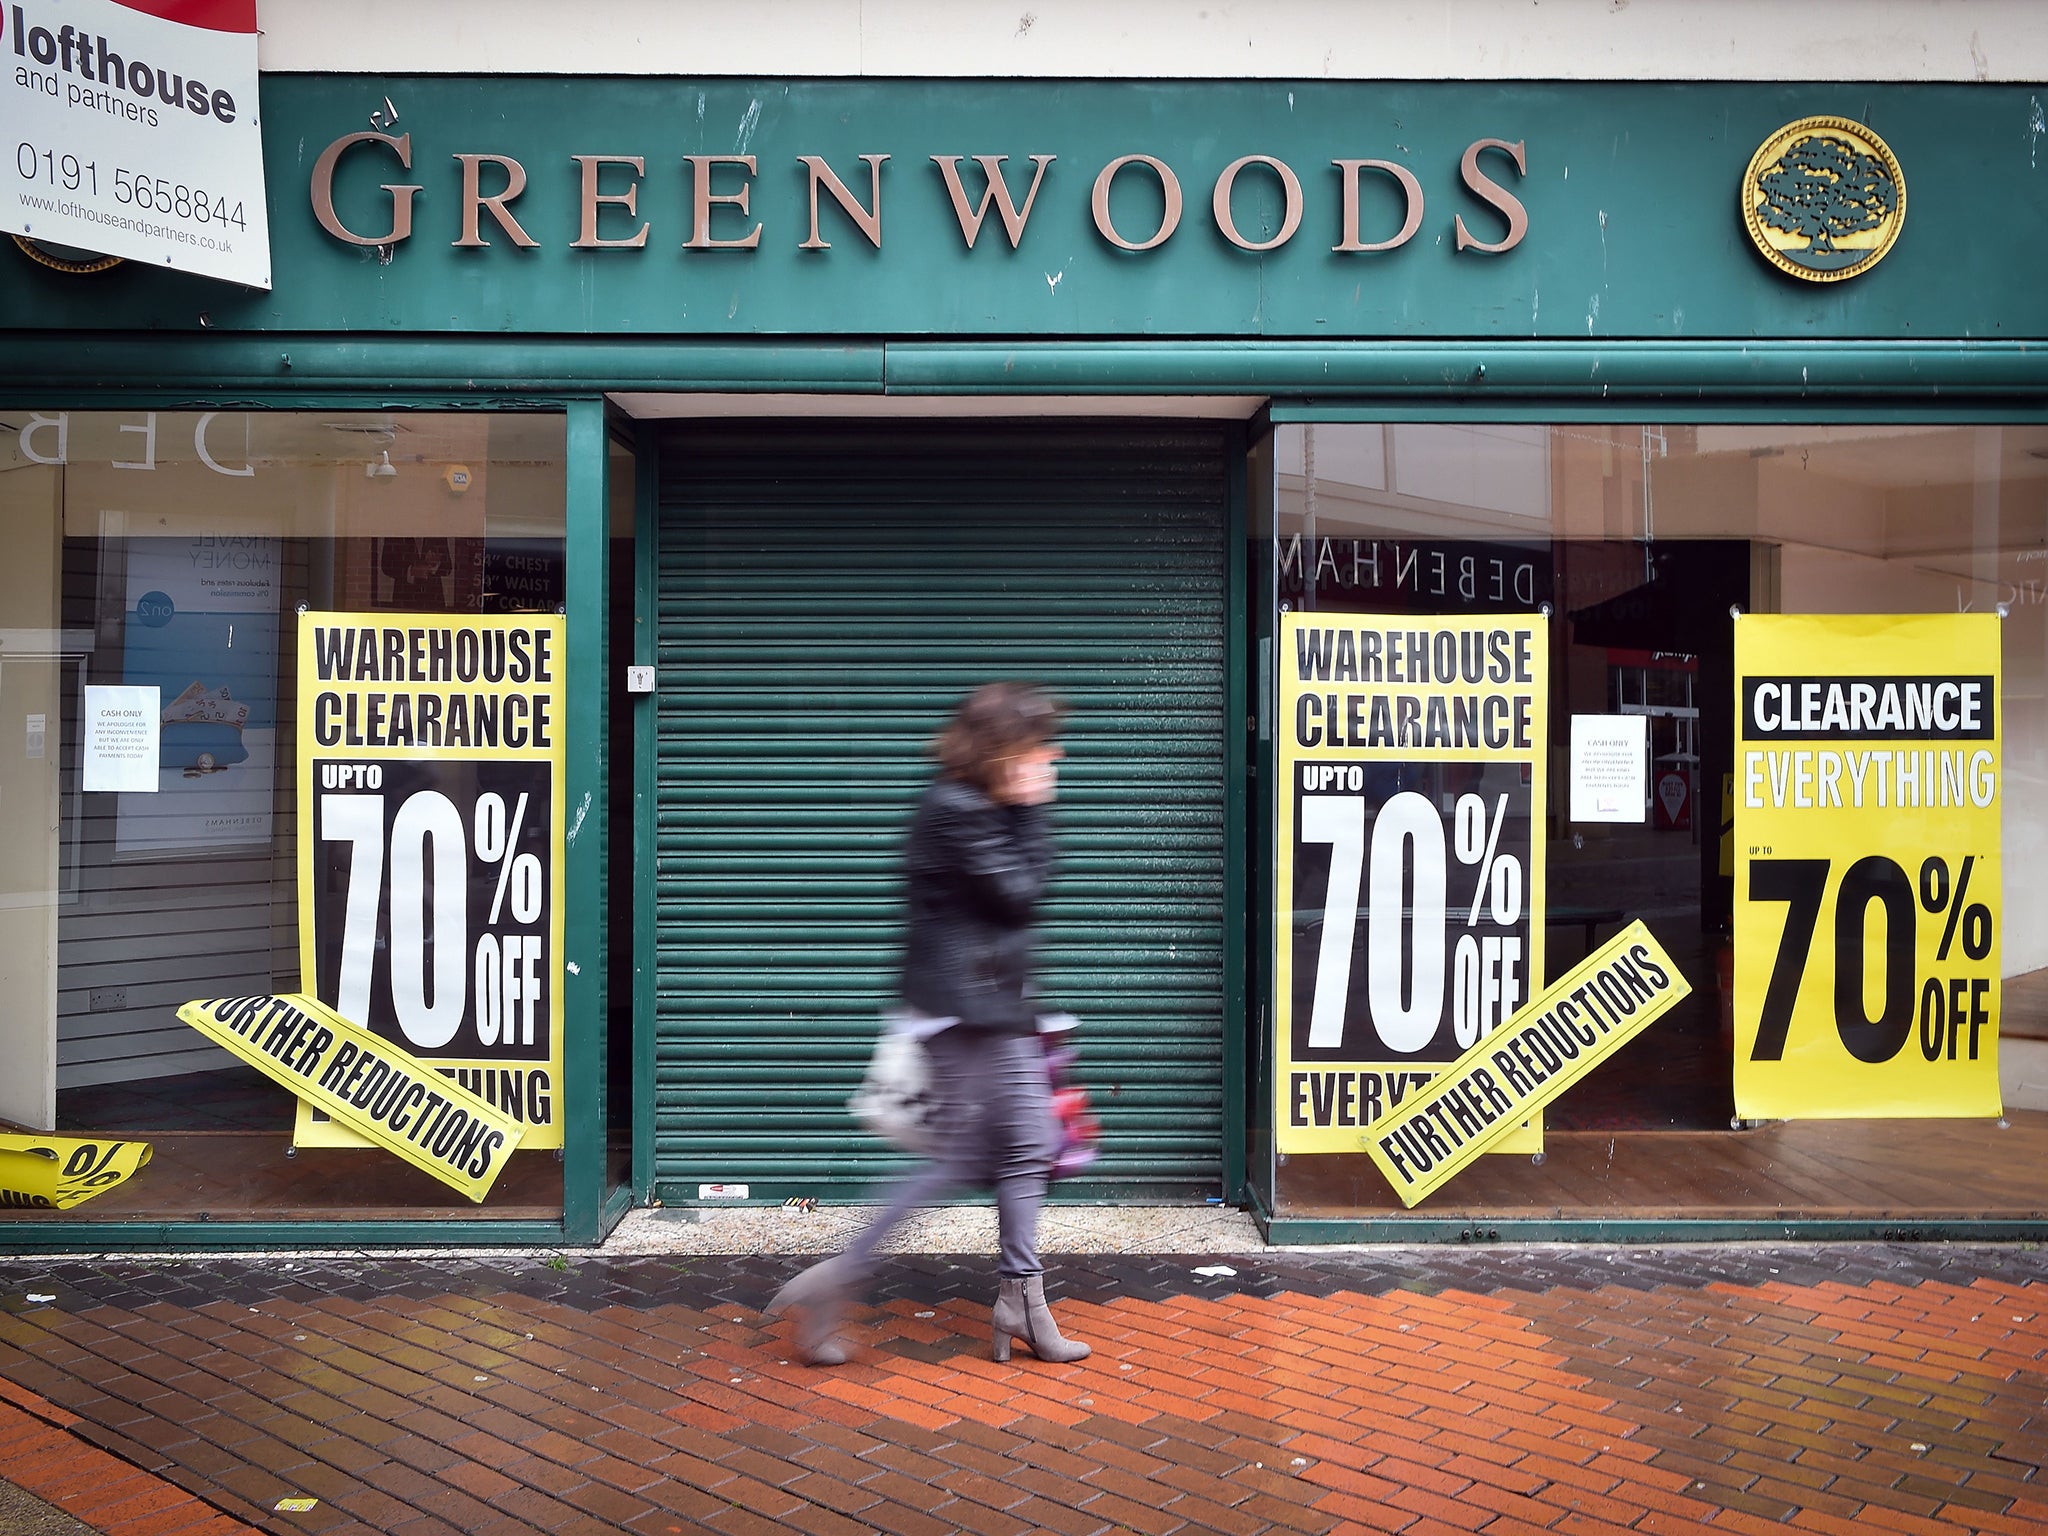 Record number of shops are closing down, leaving the high street slowly dying